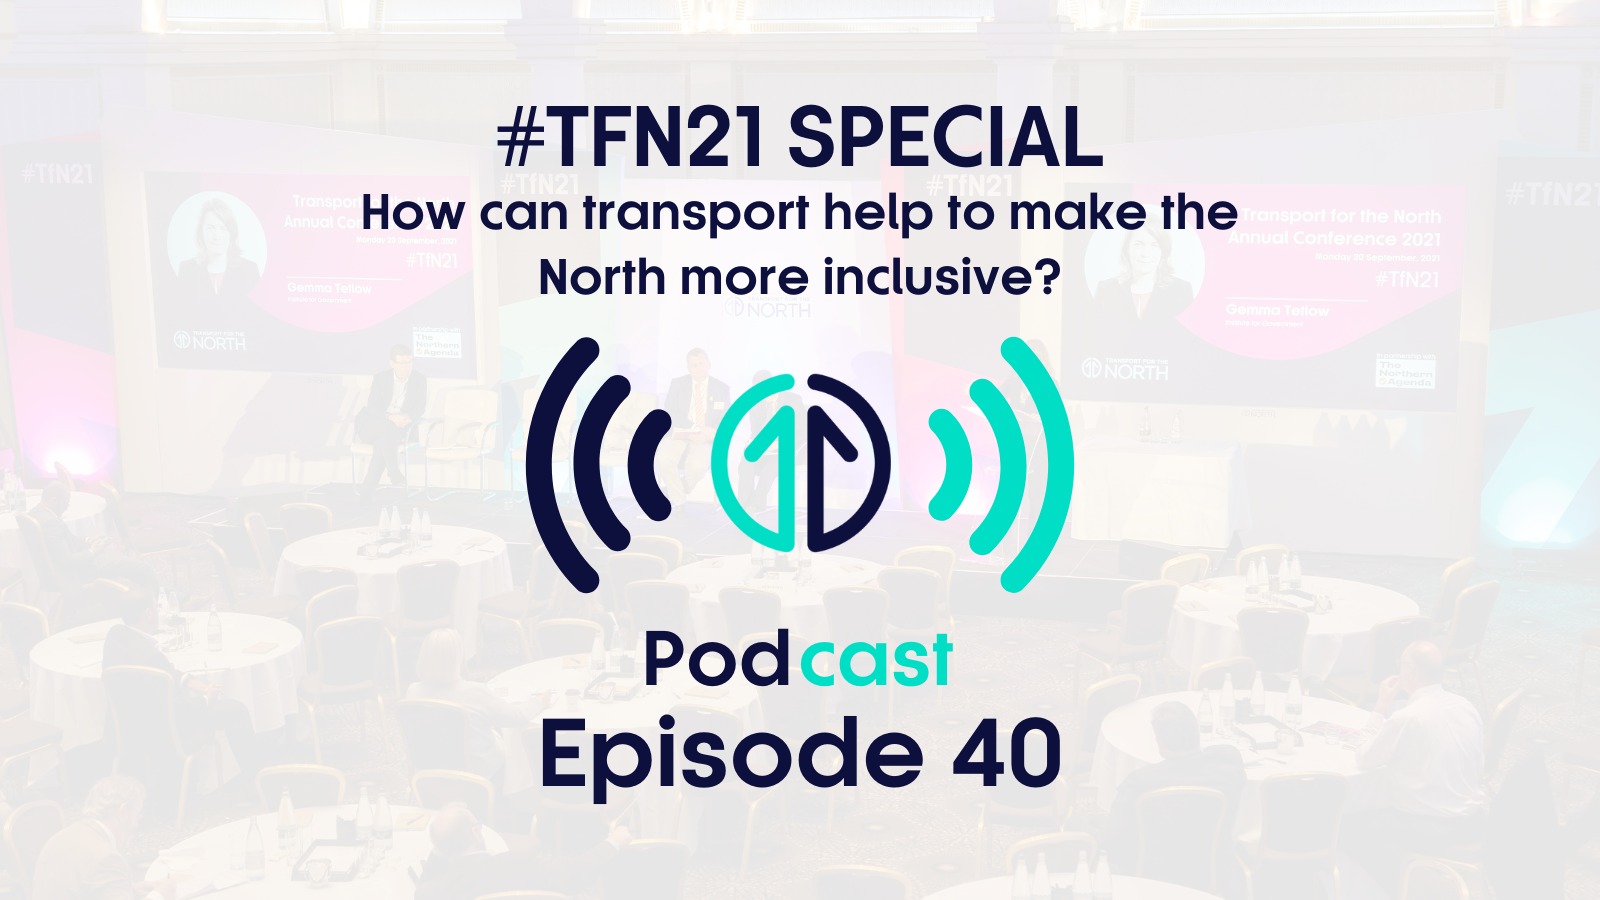 #TfN21 Annual Conference Special: How can transport make the North more inclusive? | Episode 40